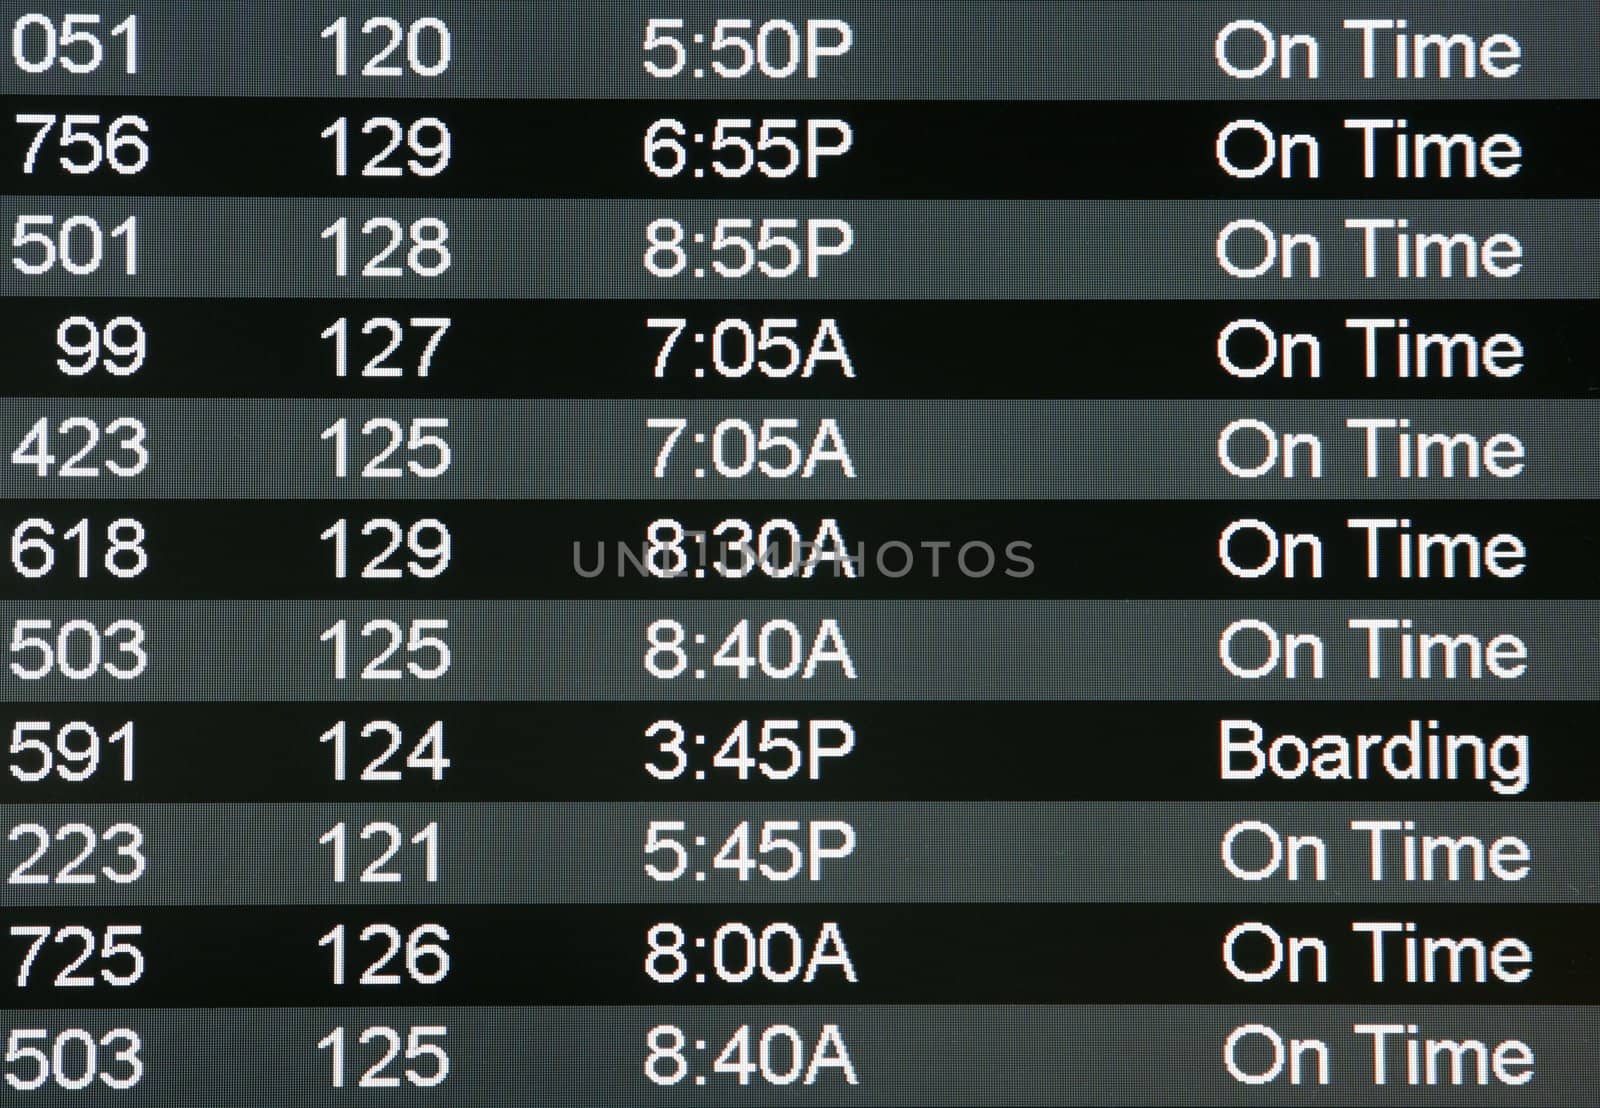 Digital airport board showing arrivals and departures on time